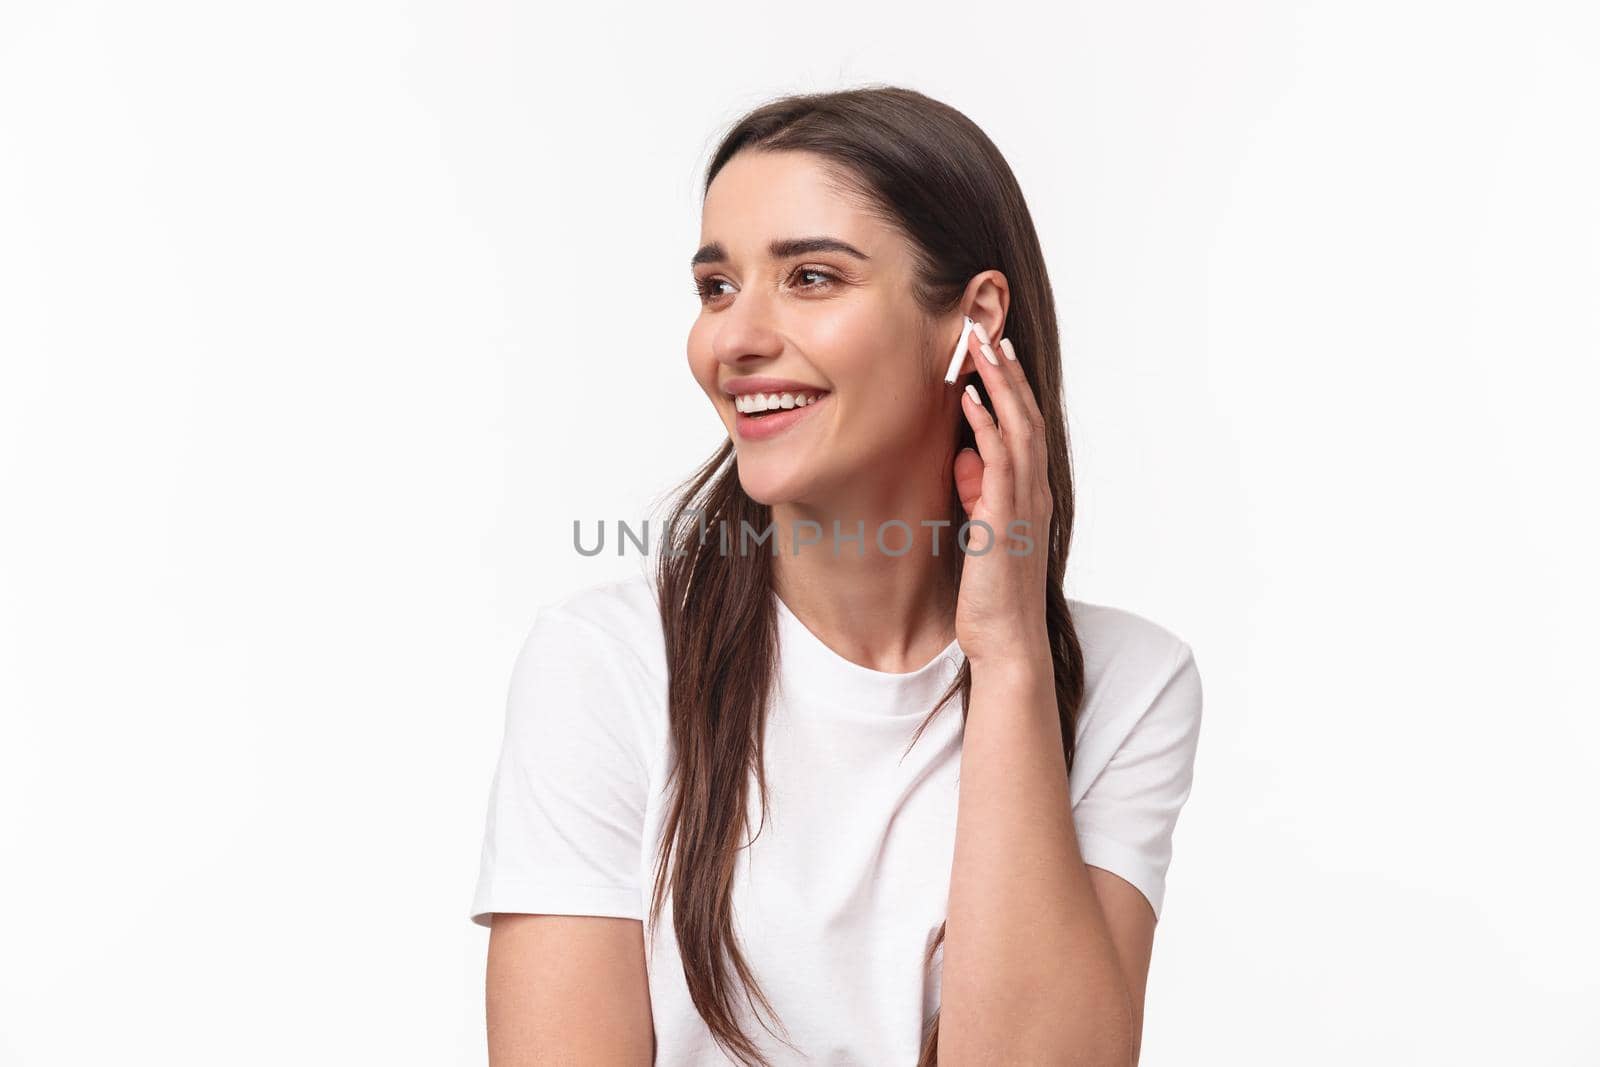 Close-up portrait of happy charming young woman with long hair, looking away smiling and laughing joyfully, changing song touching her wireless earbud, stand white background.